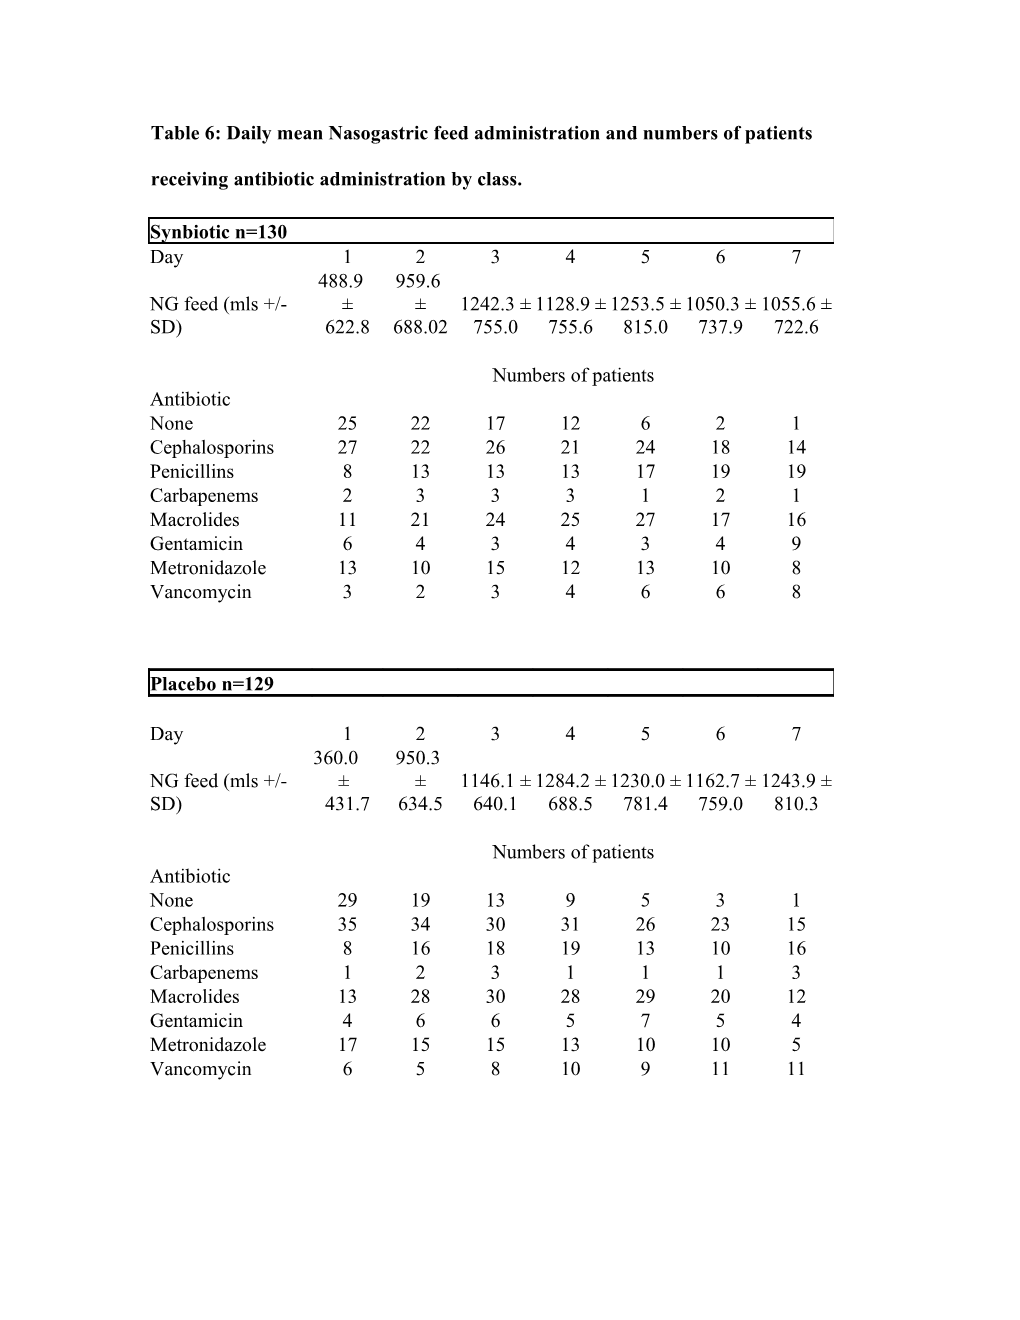 Table 6: Daily Mean Nasogastric Feed Administration and Numbers of Patients Receiving Antibiotic